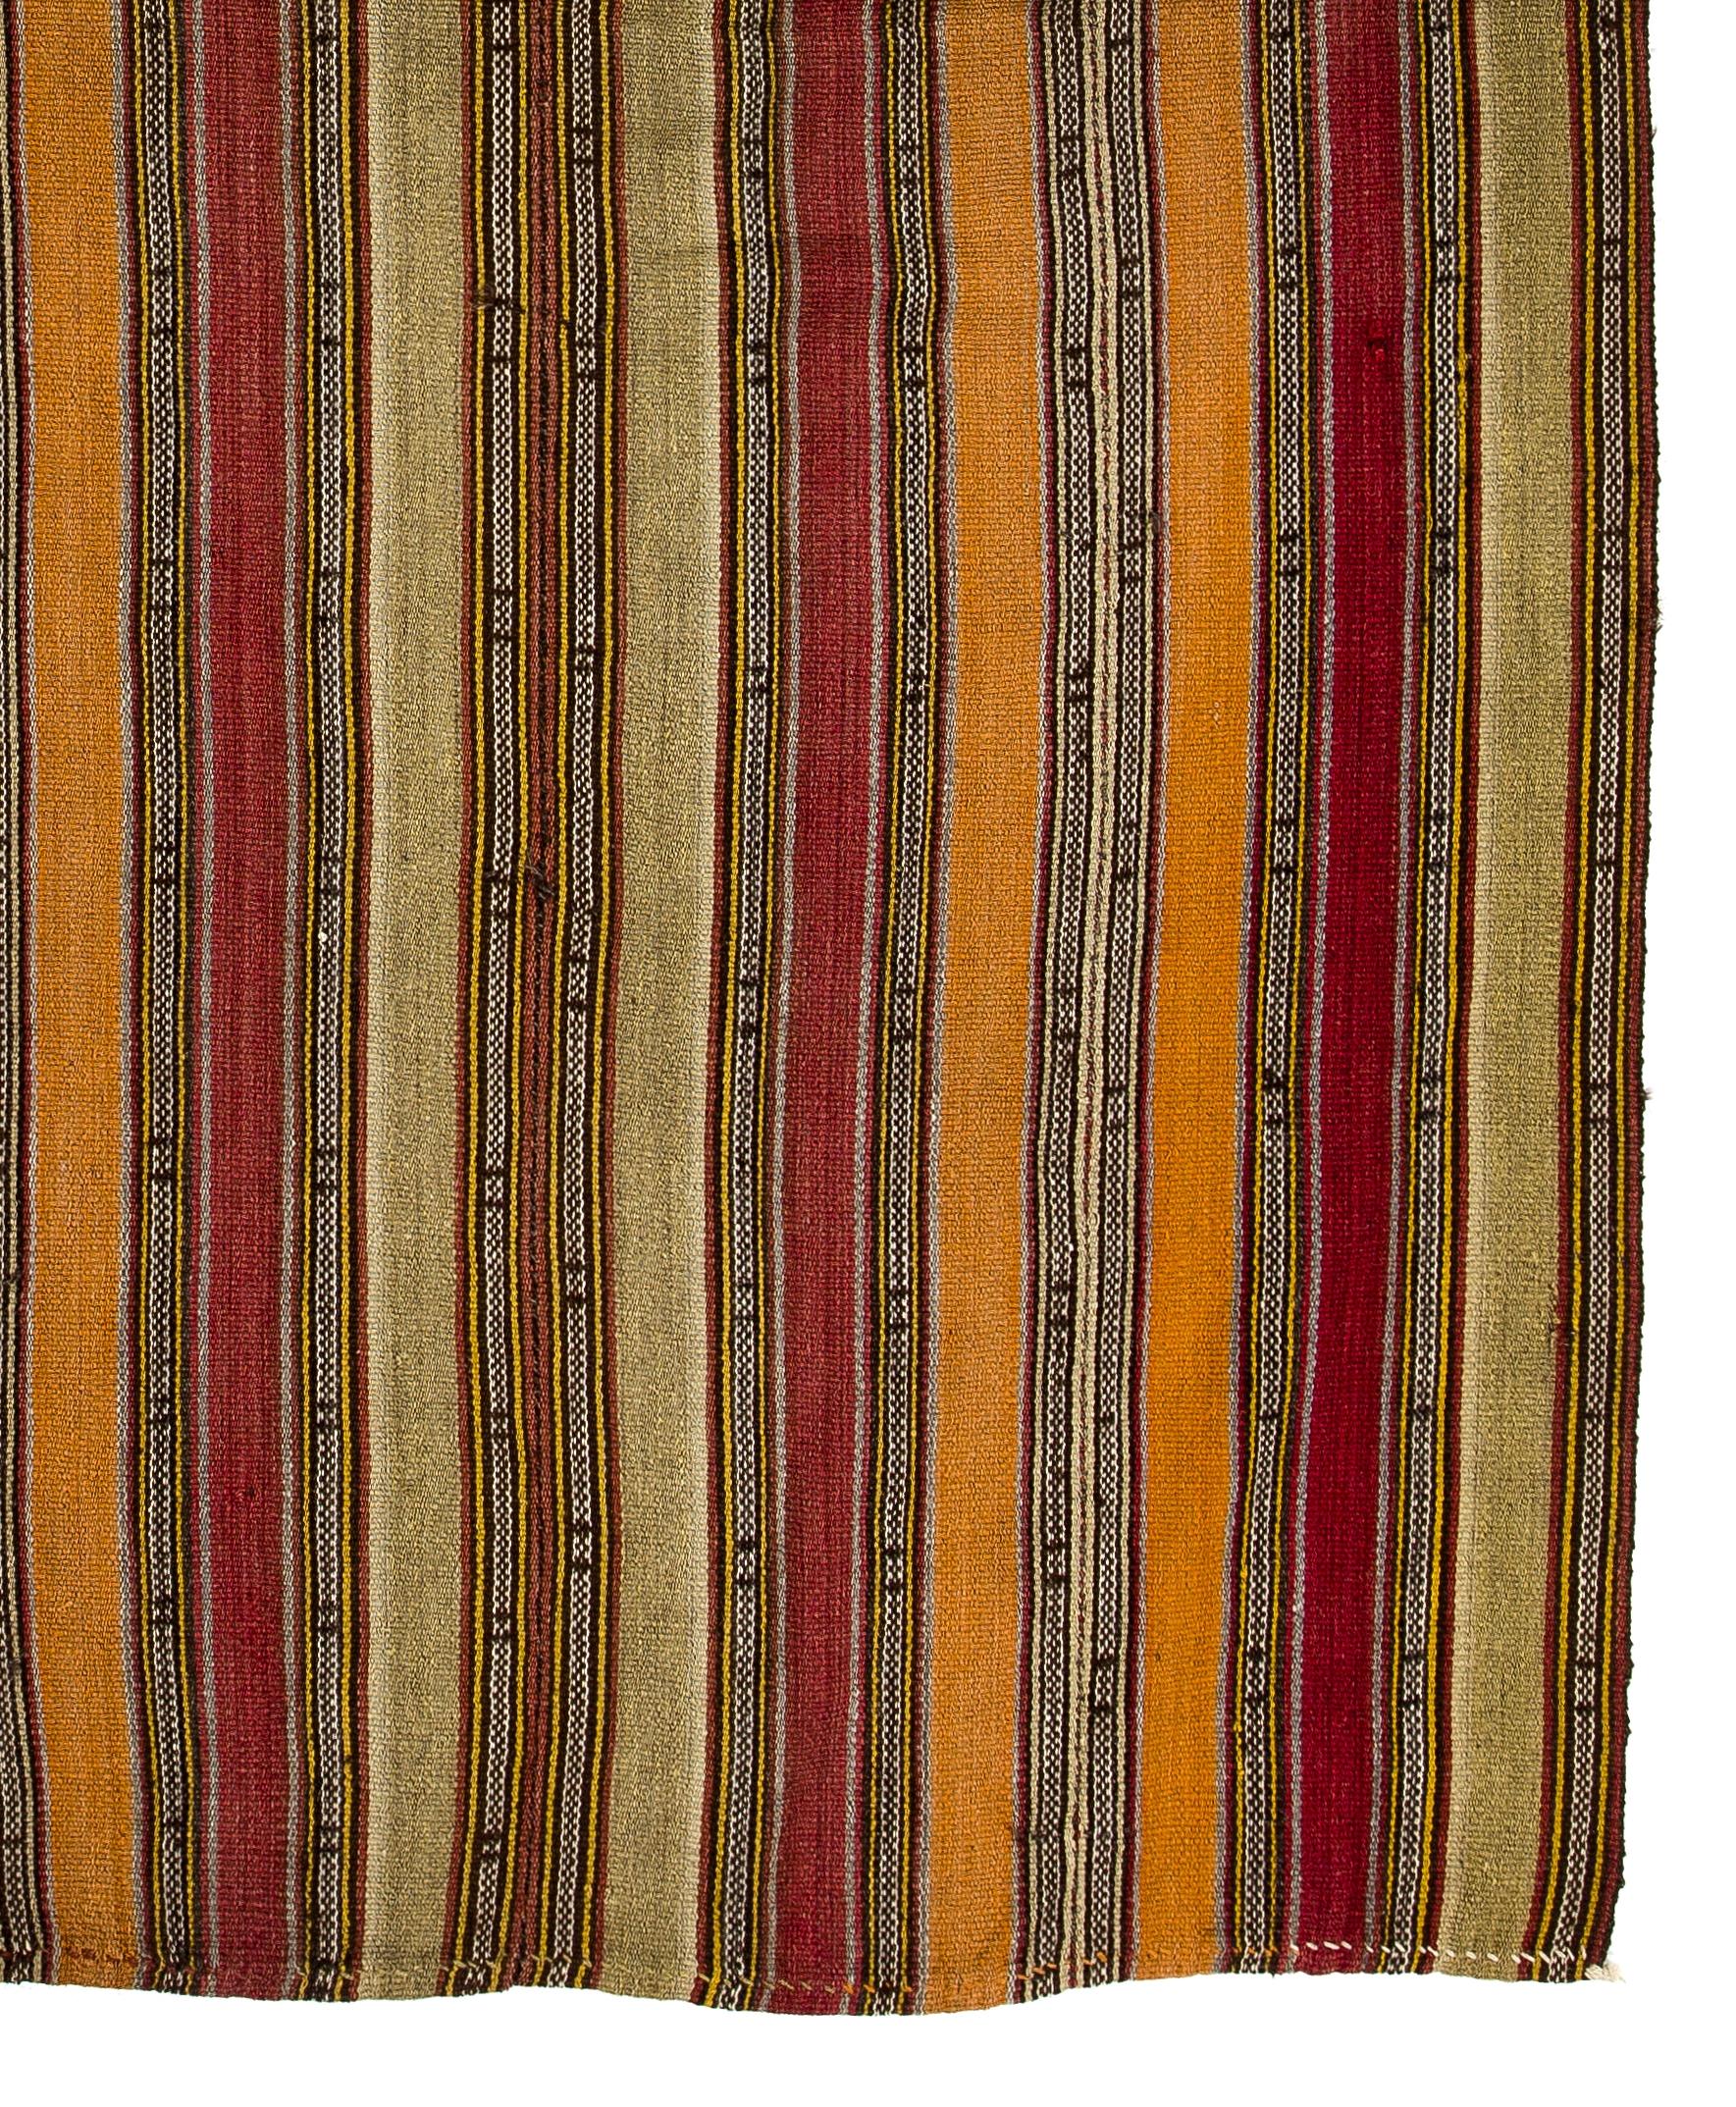 20th Century 6x7.2 Ft Colorful Handwoven Turkish Kilim Rug with Vertical Bands, 100% Wool For Sale